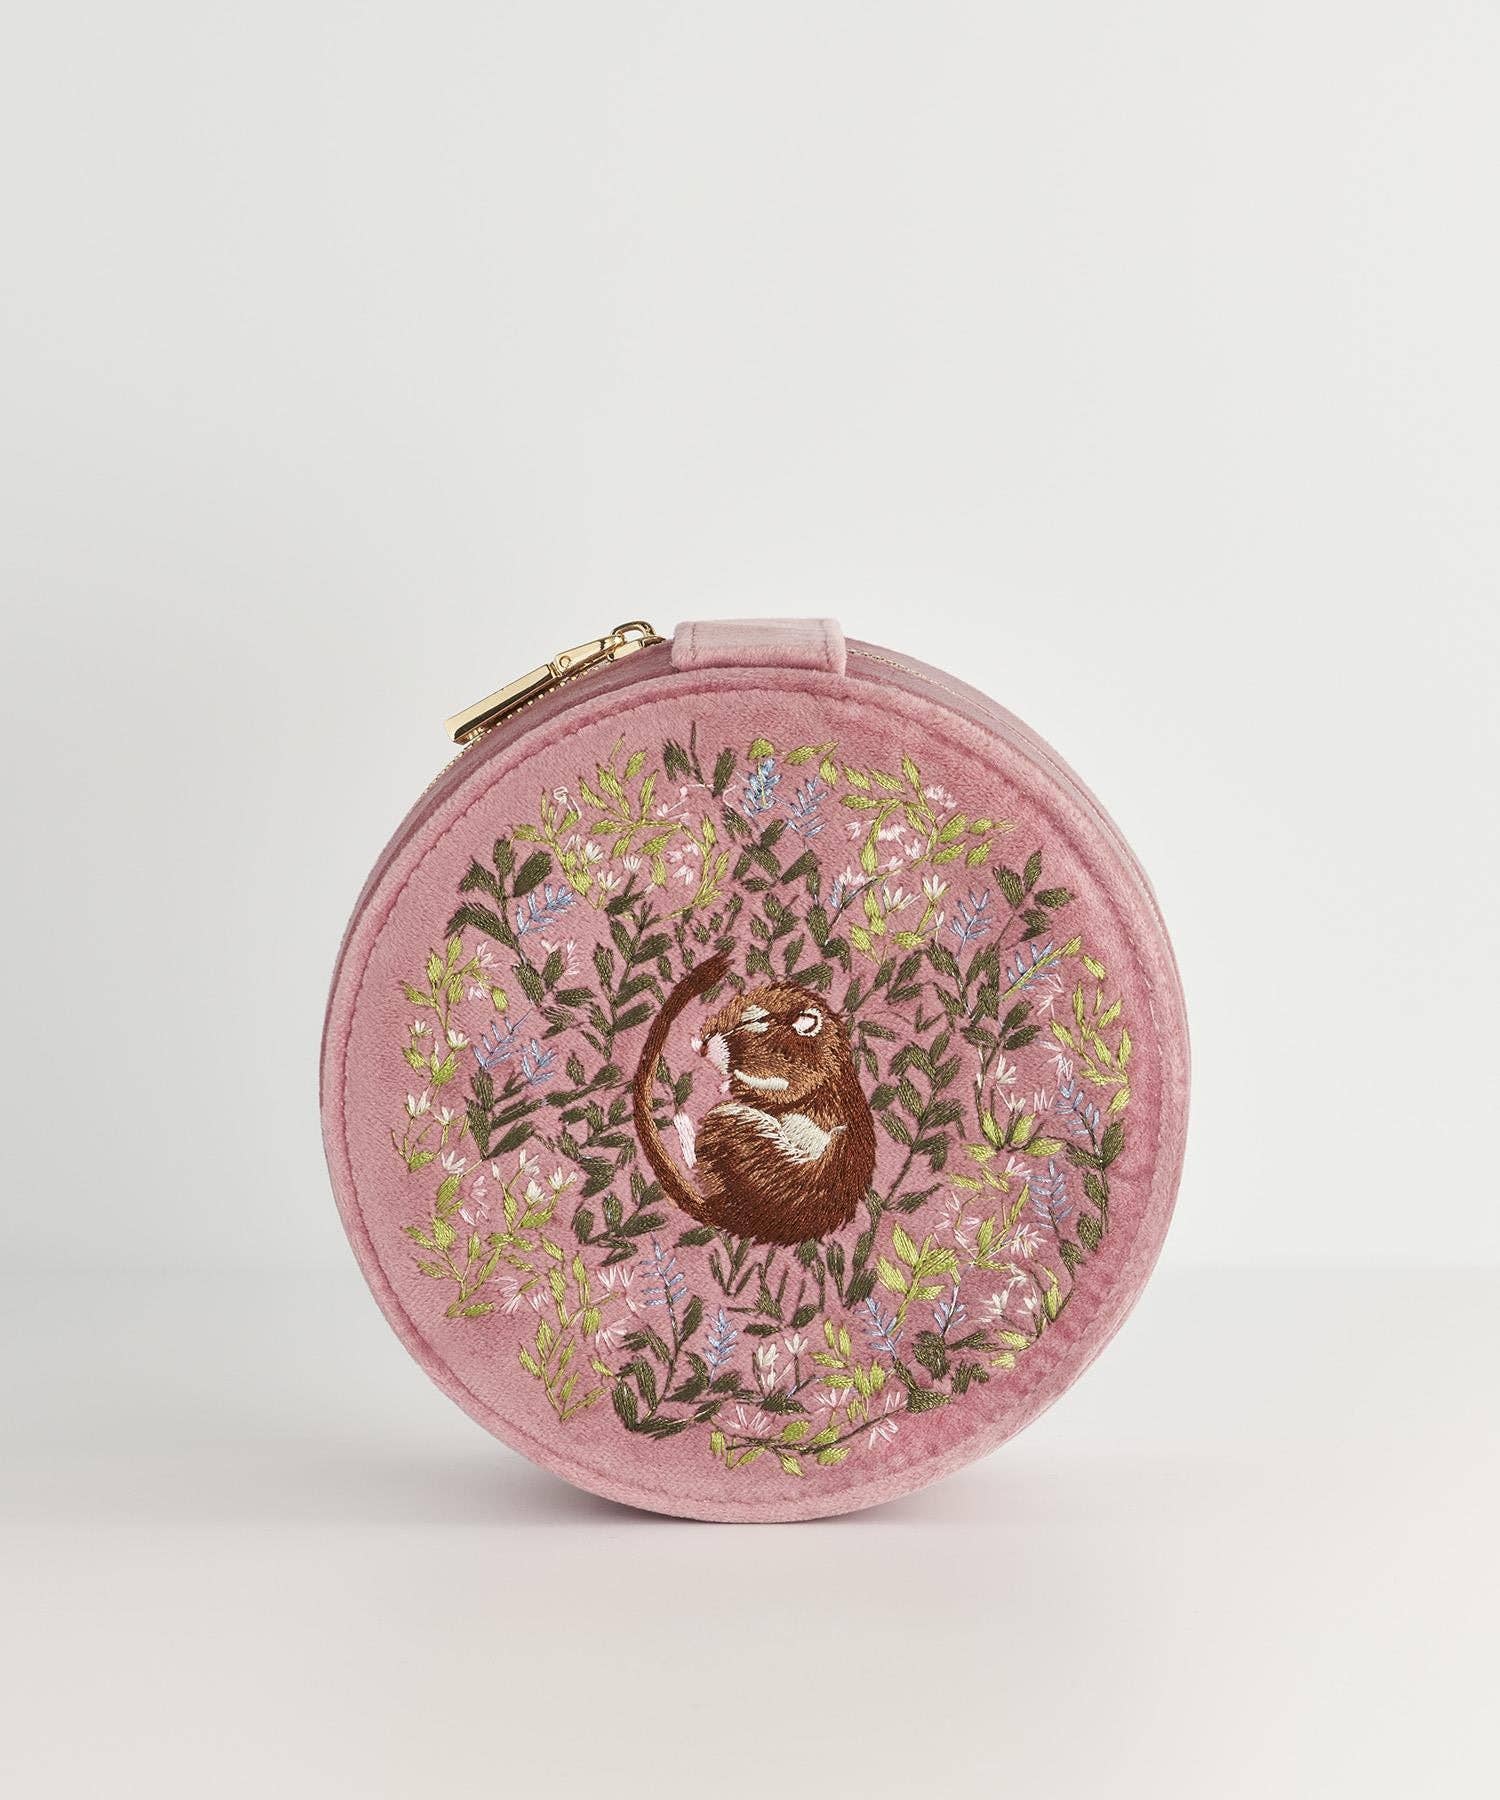 Fable Chloe Dormouse Jewellery box - Pink - Out of the Blue